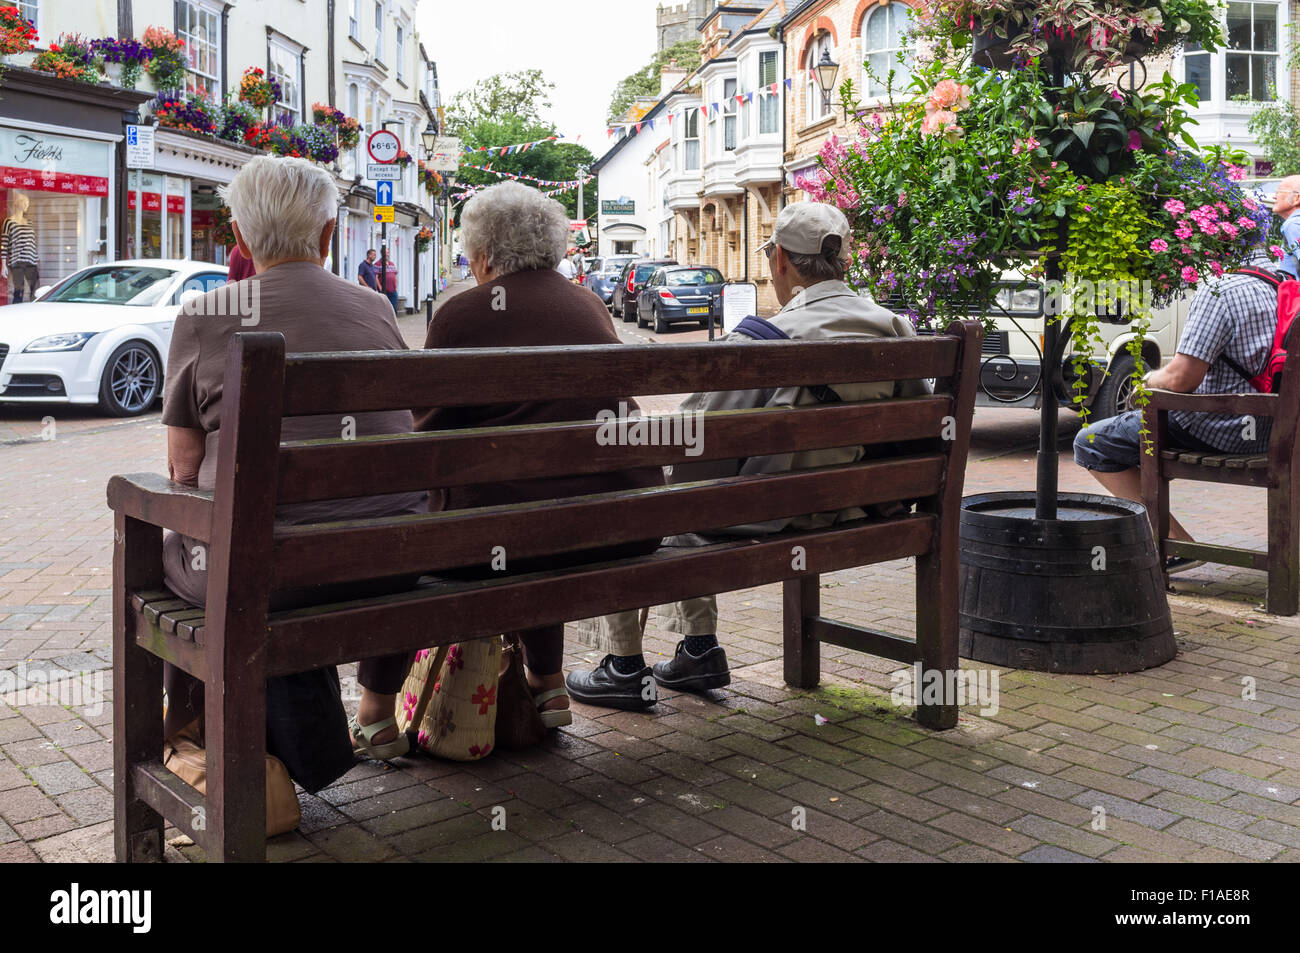 Sidmouth, Devon. 2015. A group of three pensioners are sitting on a public bench in Sidmouth town centre. Stock Photo